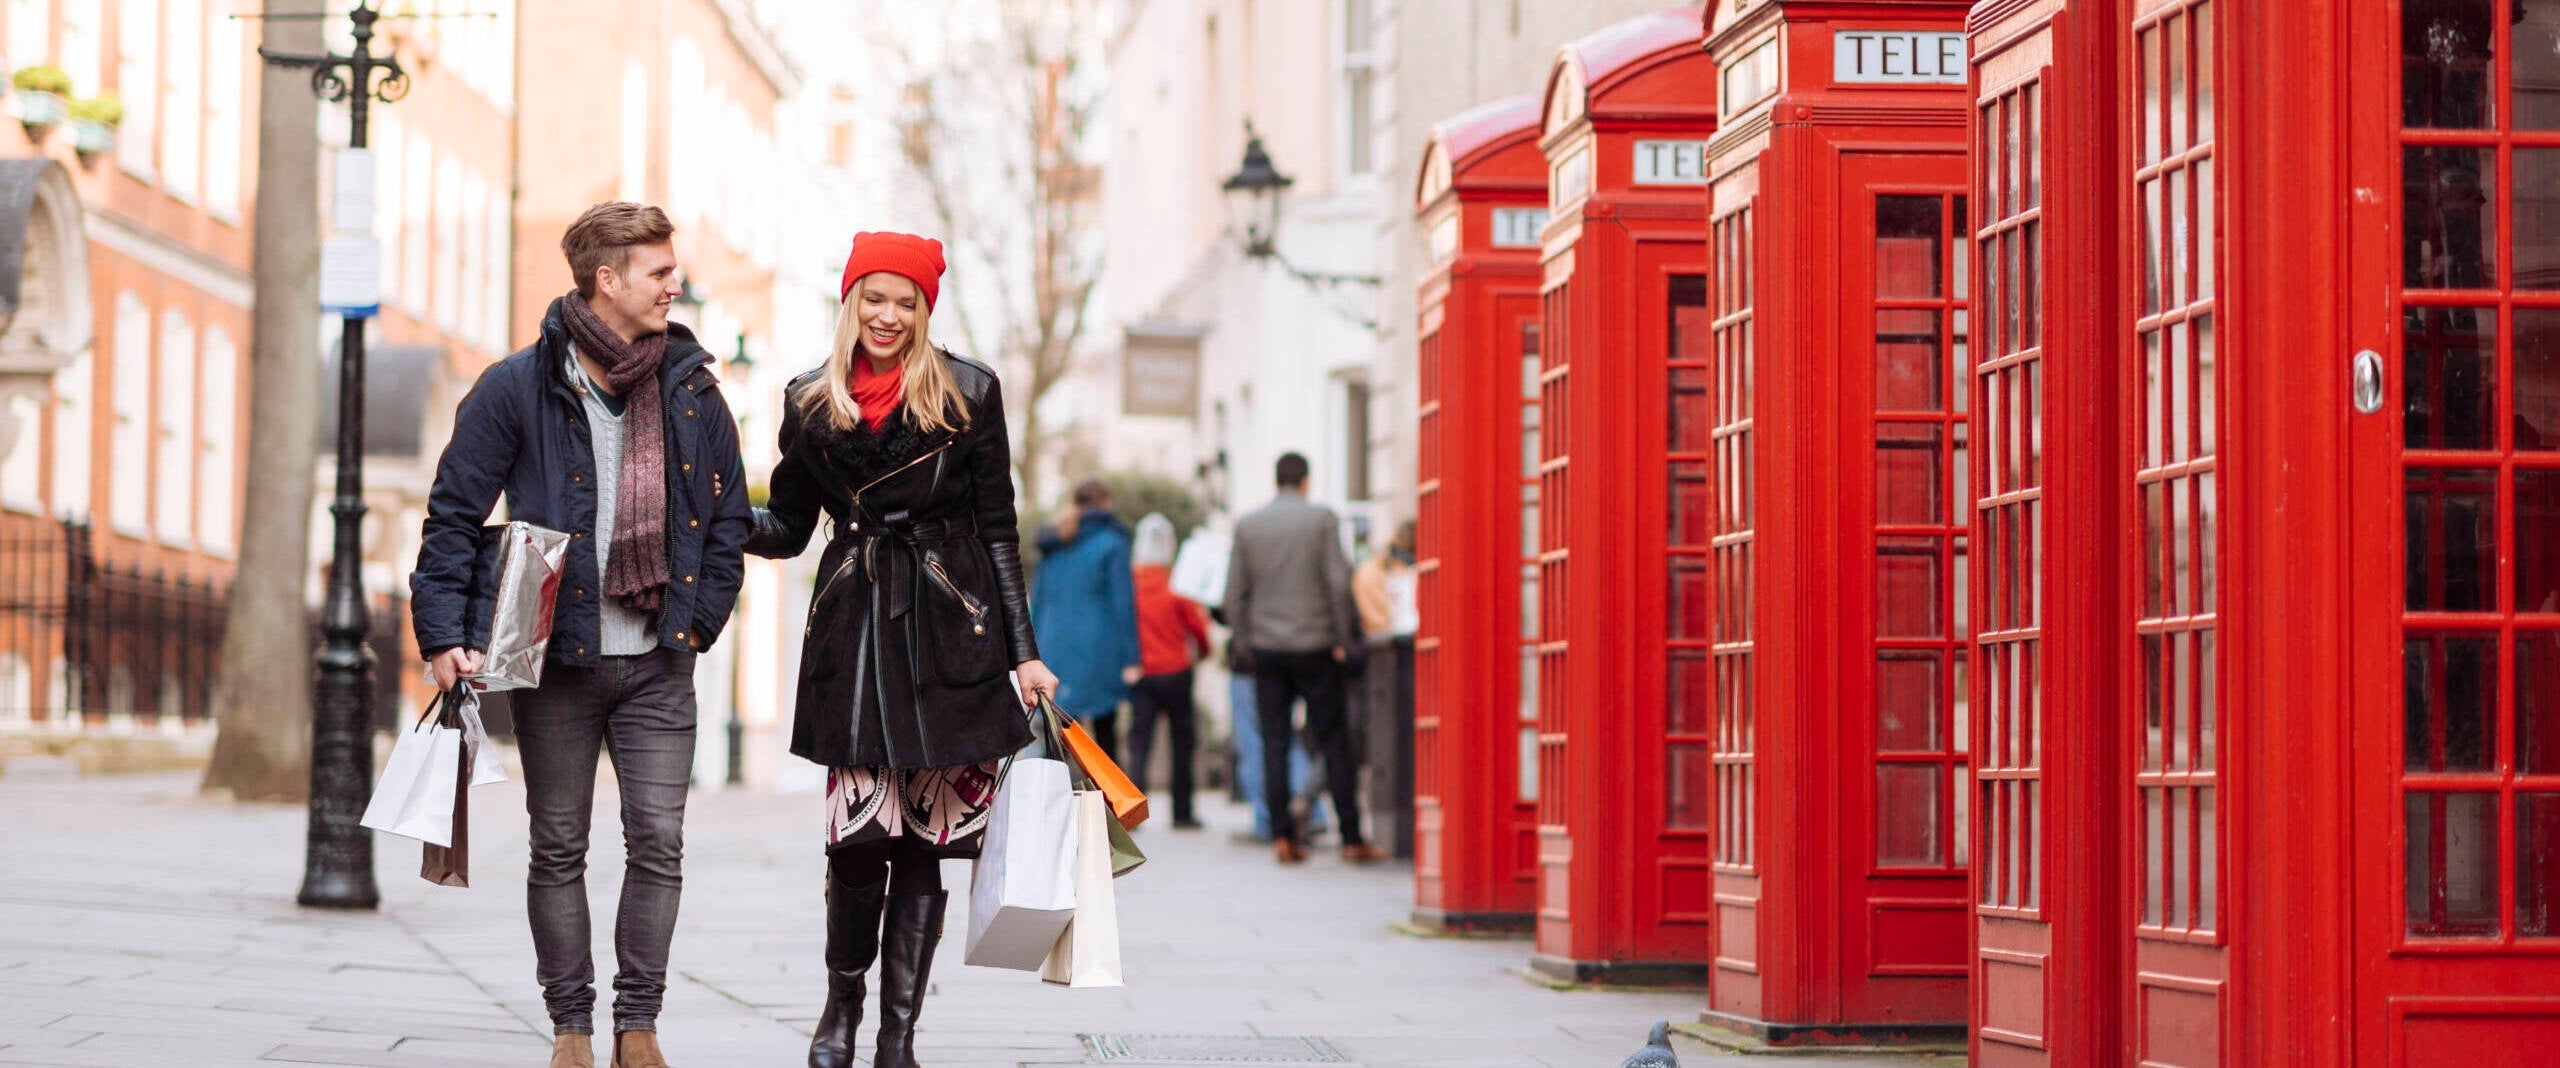 The ultimate guide to shopping in London - The Points Guy